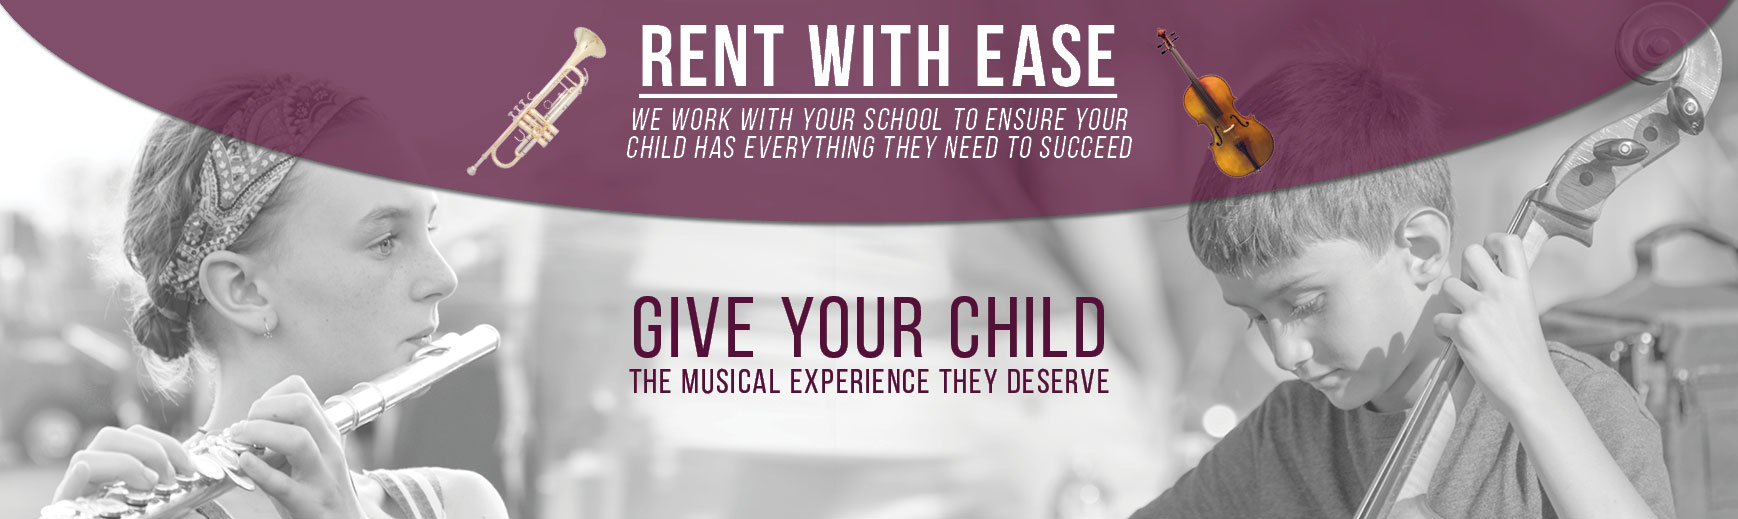 Rent with ease, we work with your school to ensure your child has everything they need to succeed.  Give your child the musical experience they deserve.